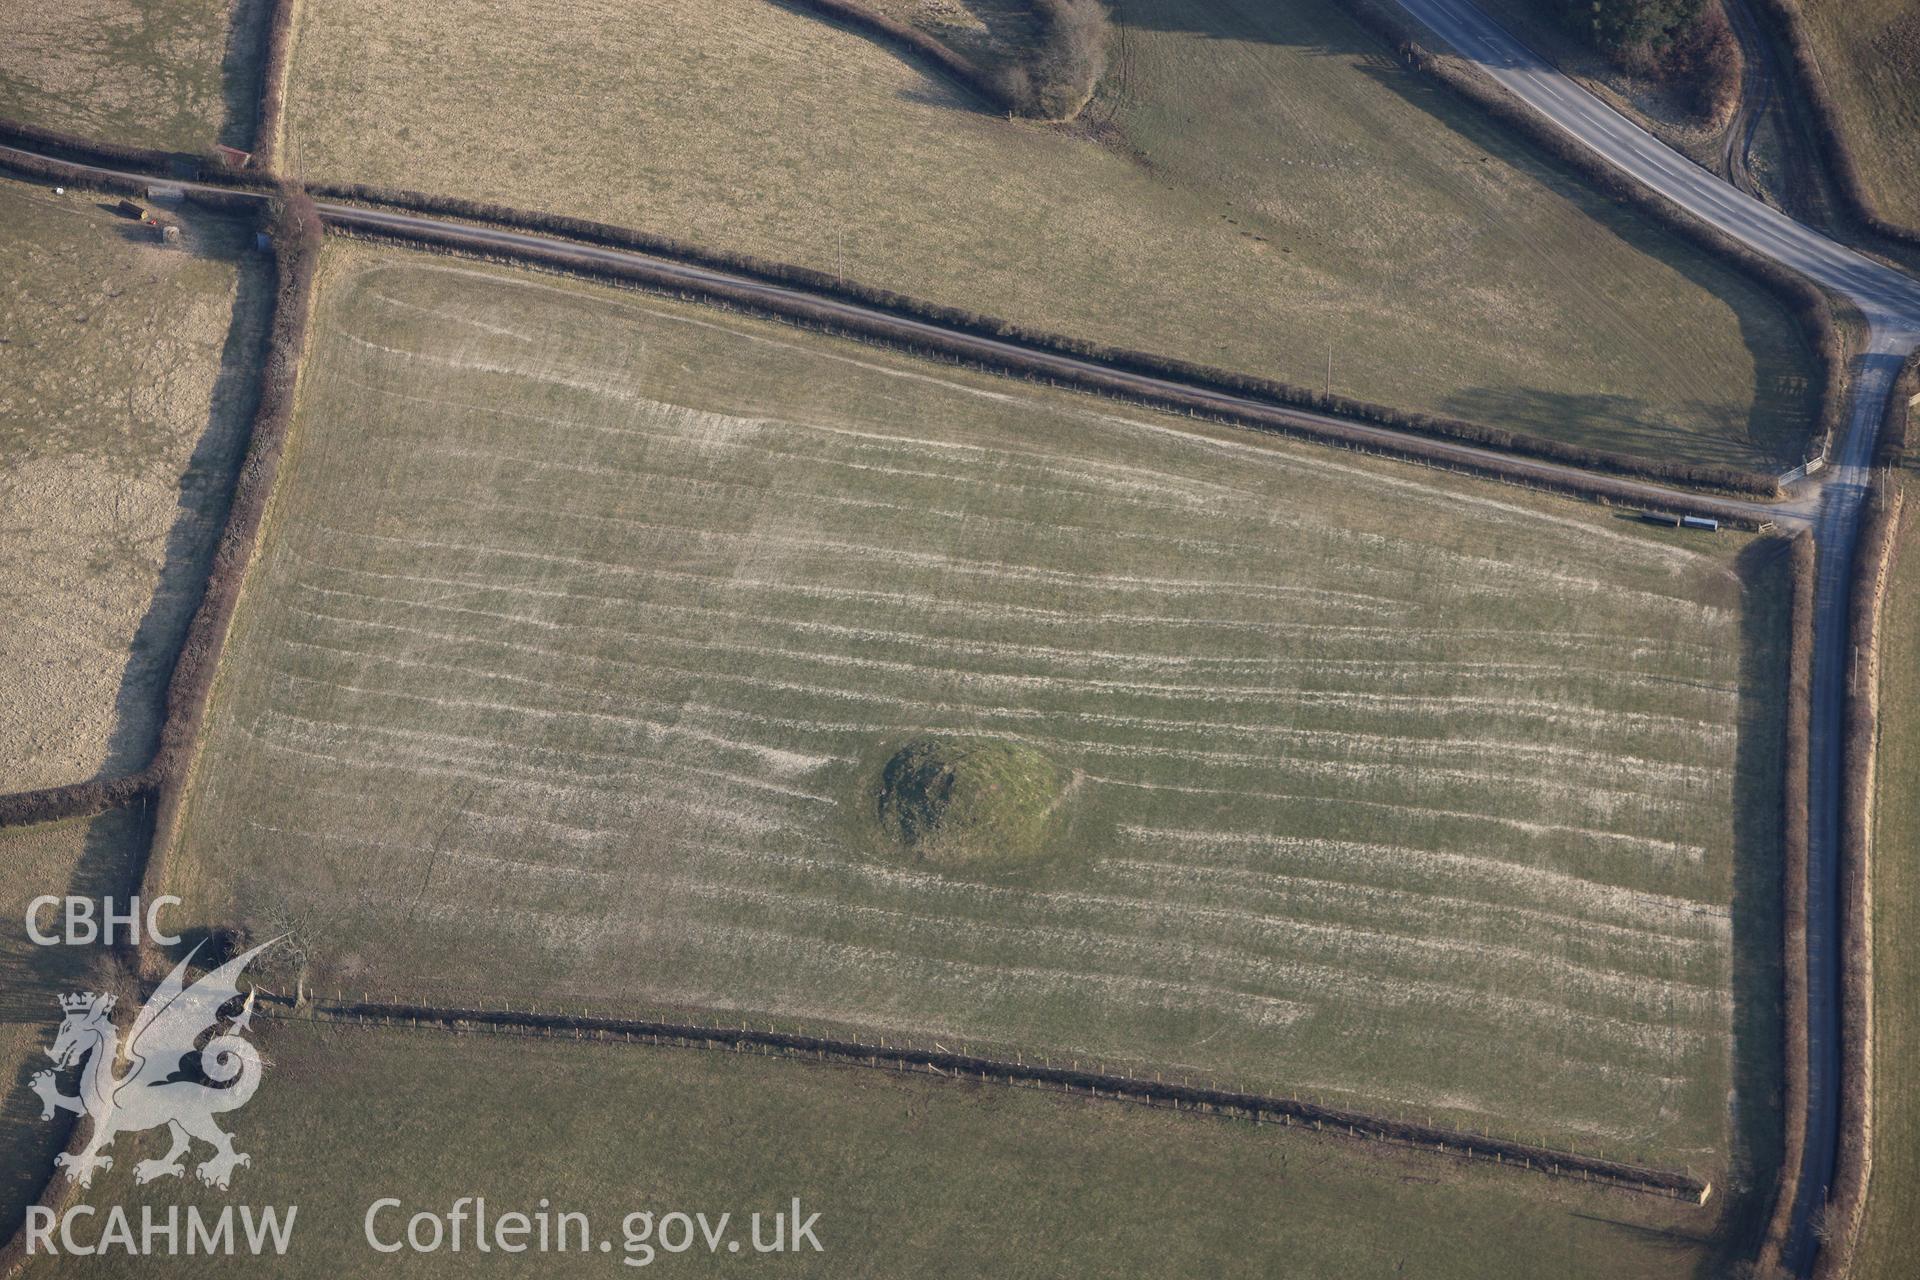 RCAHMW colour oblique photograph of Ty Lettice Round Barrow. Taken by Toby Driver on 11/03/2010.